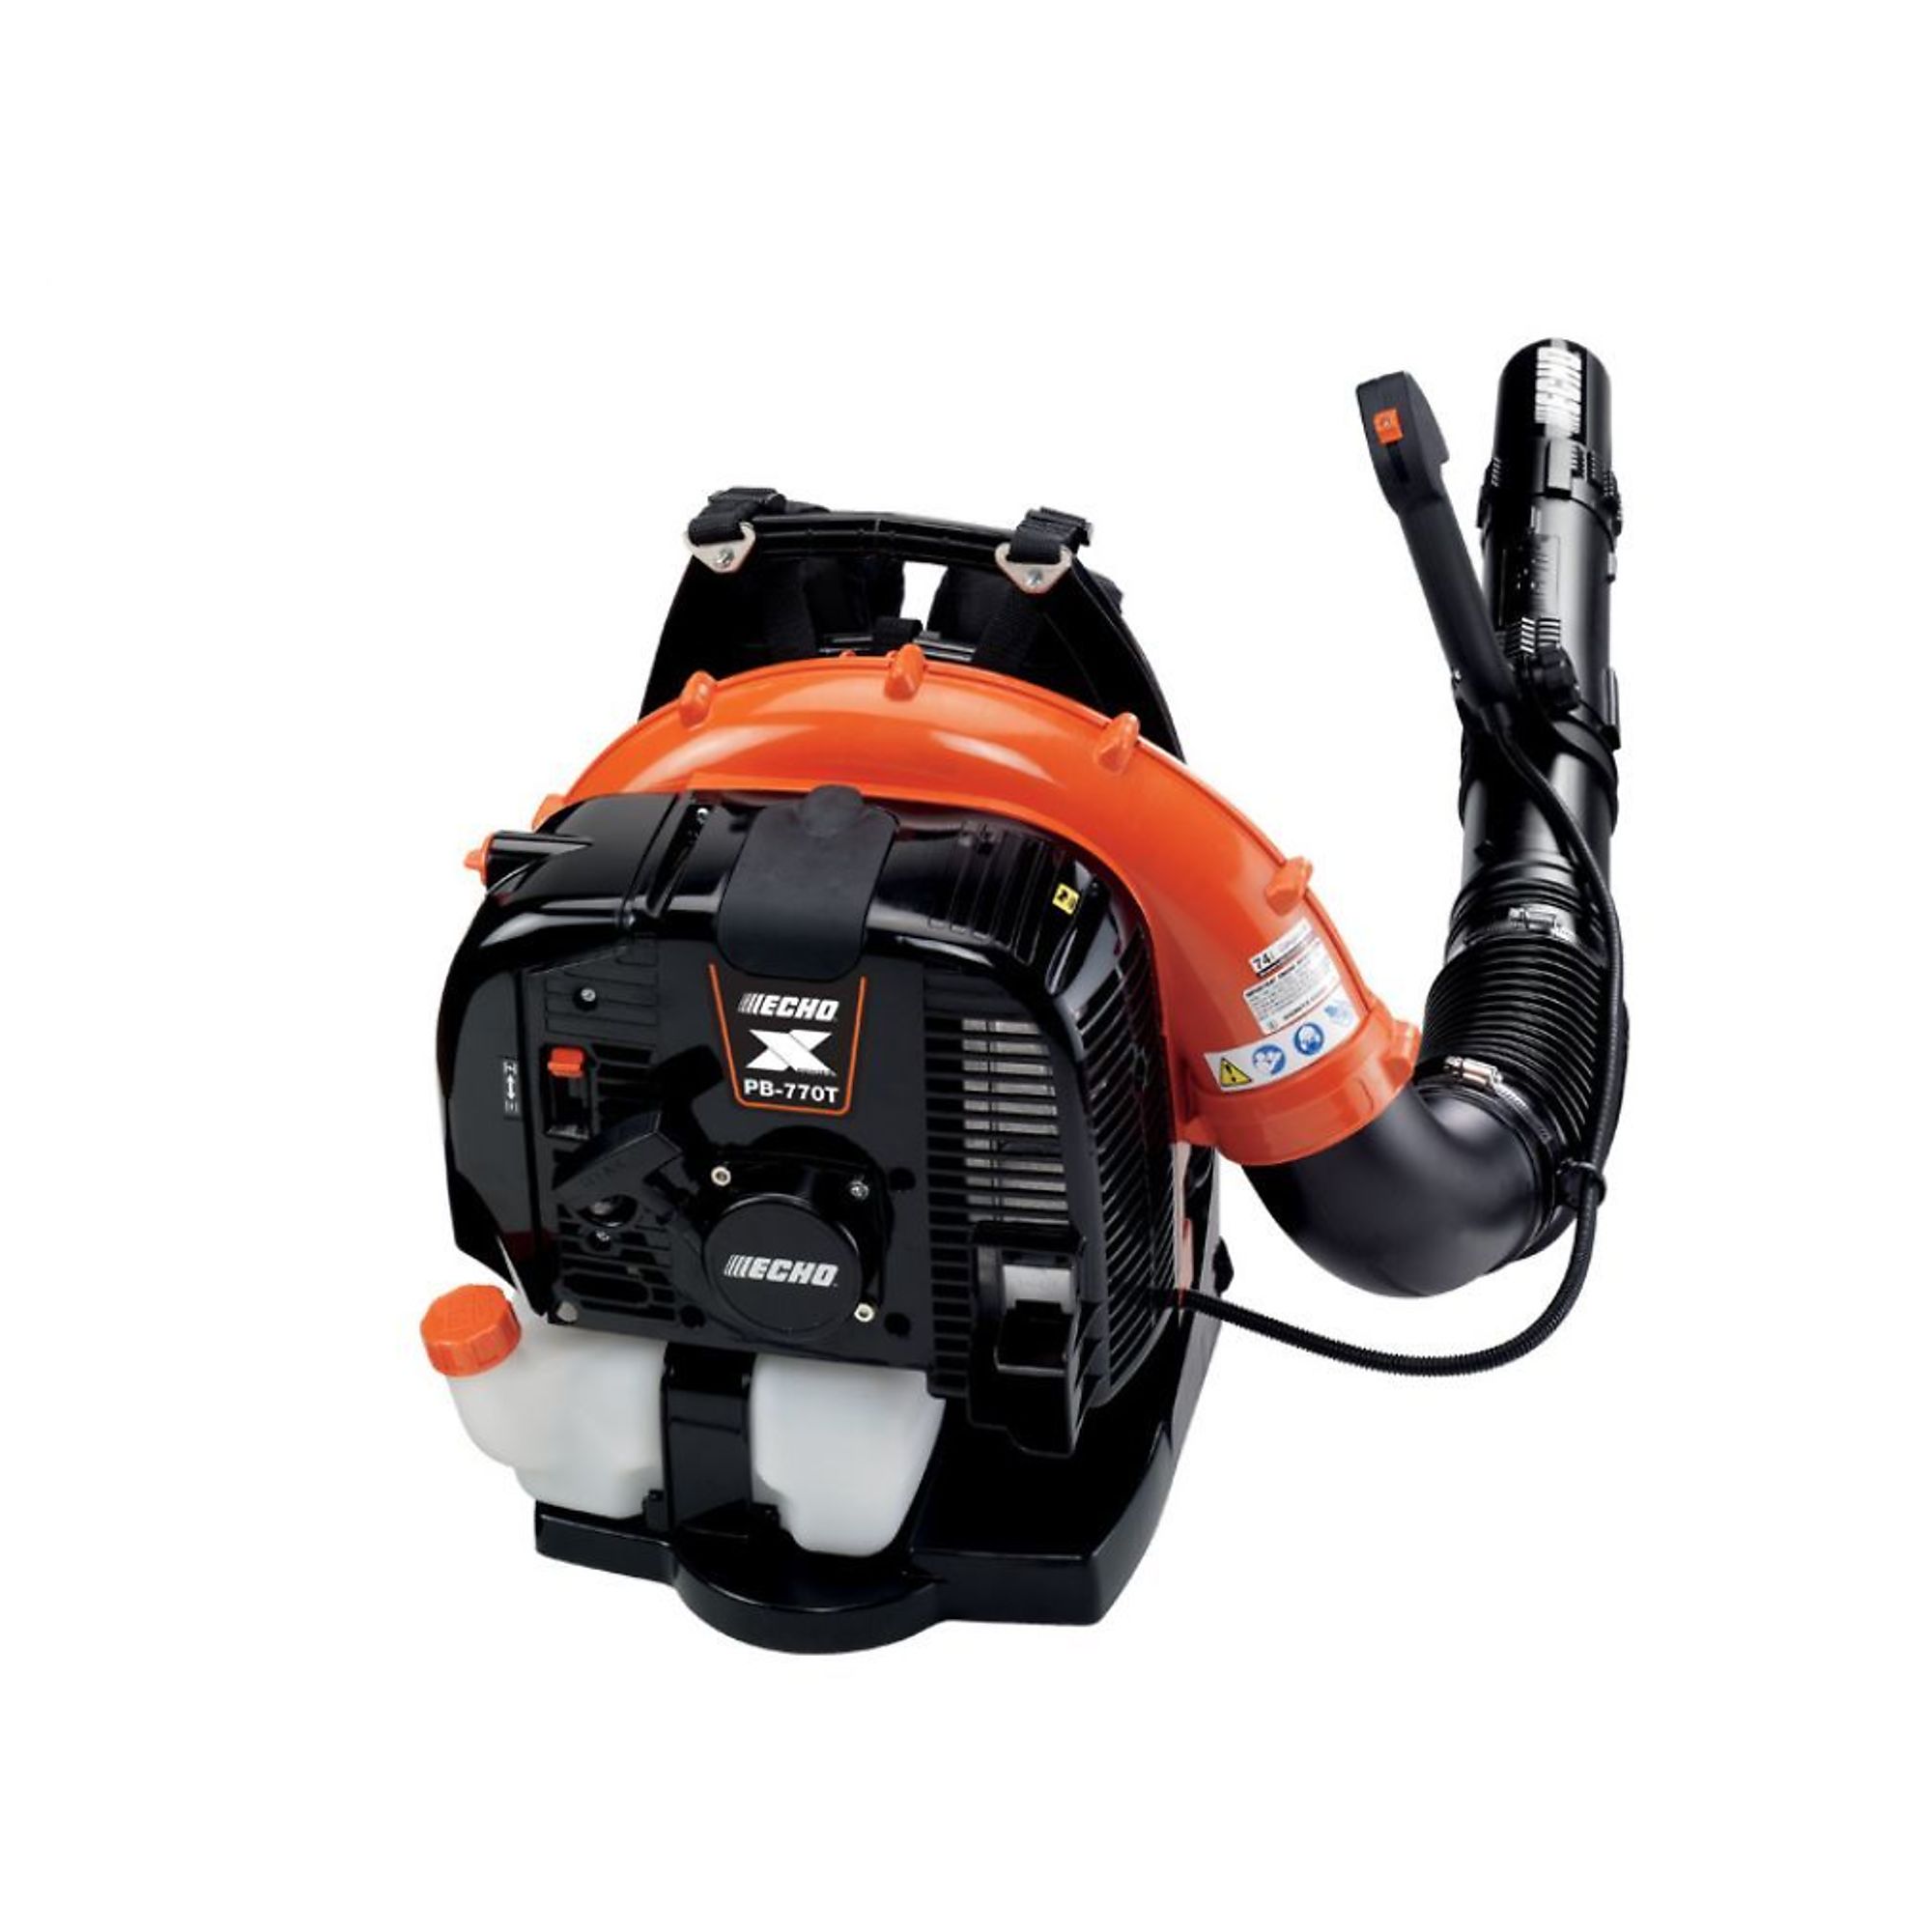 ECHO X Series, Gas-Powered Backpack Blower with Tube Throttle, Blower Type Backpack, Model PB-770T